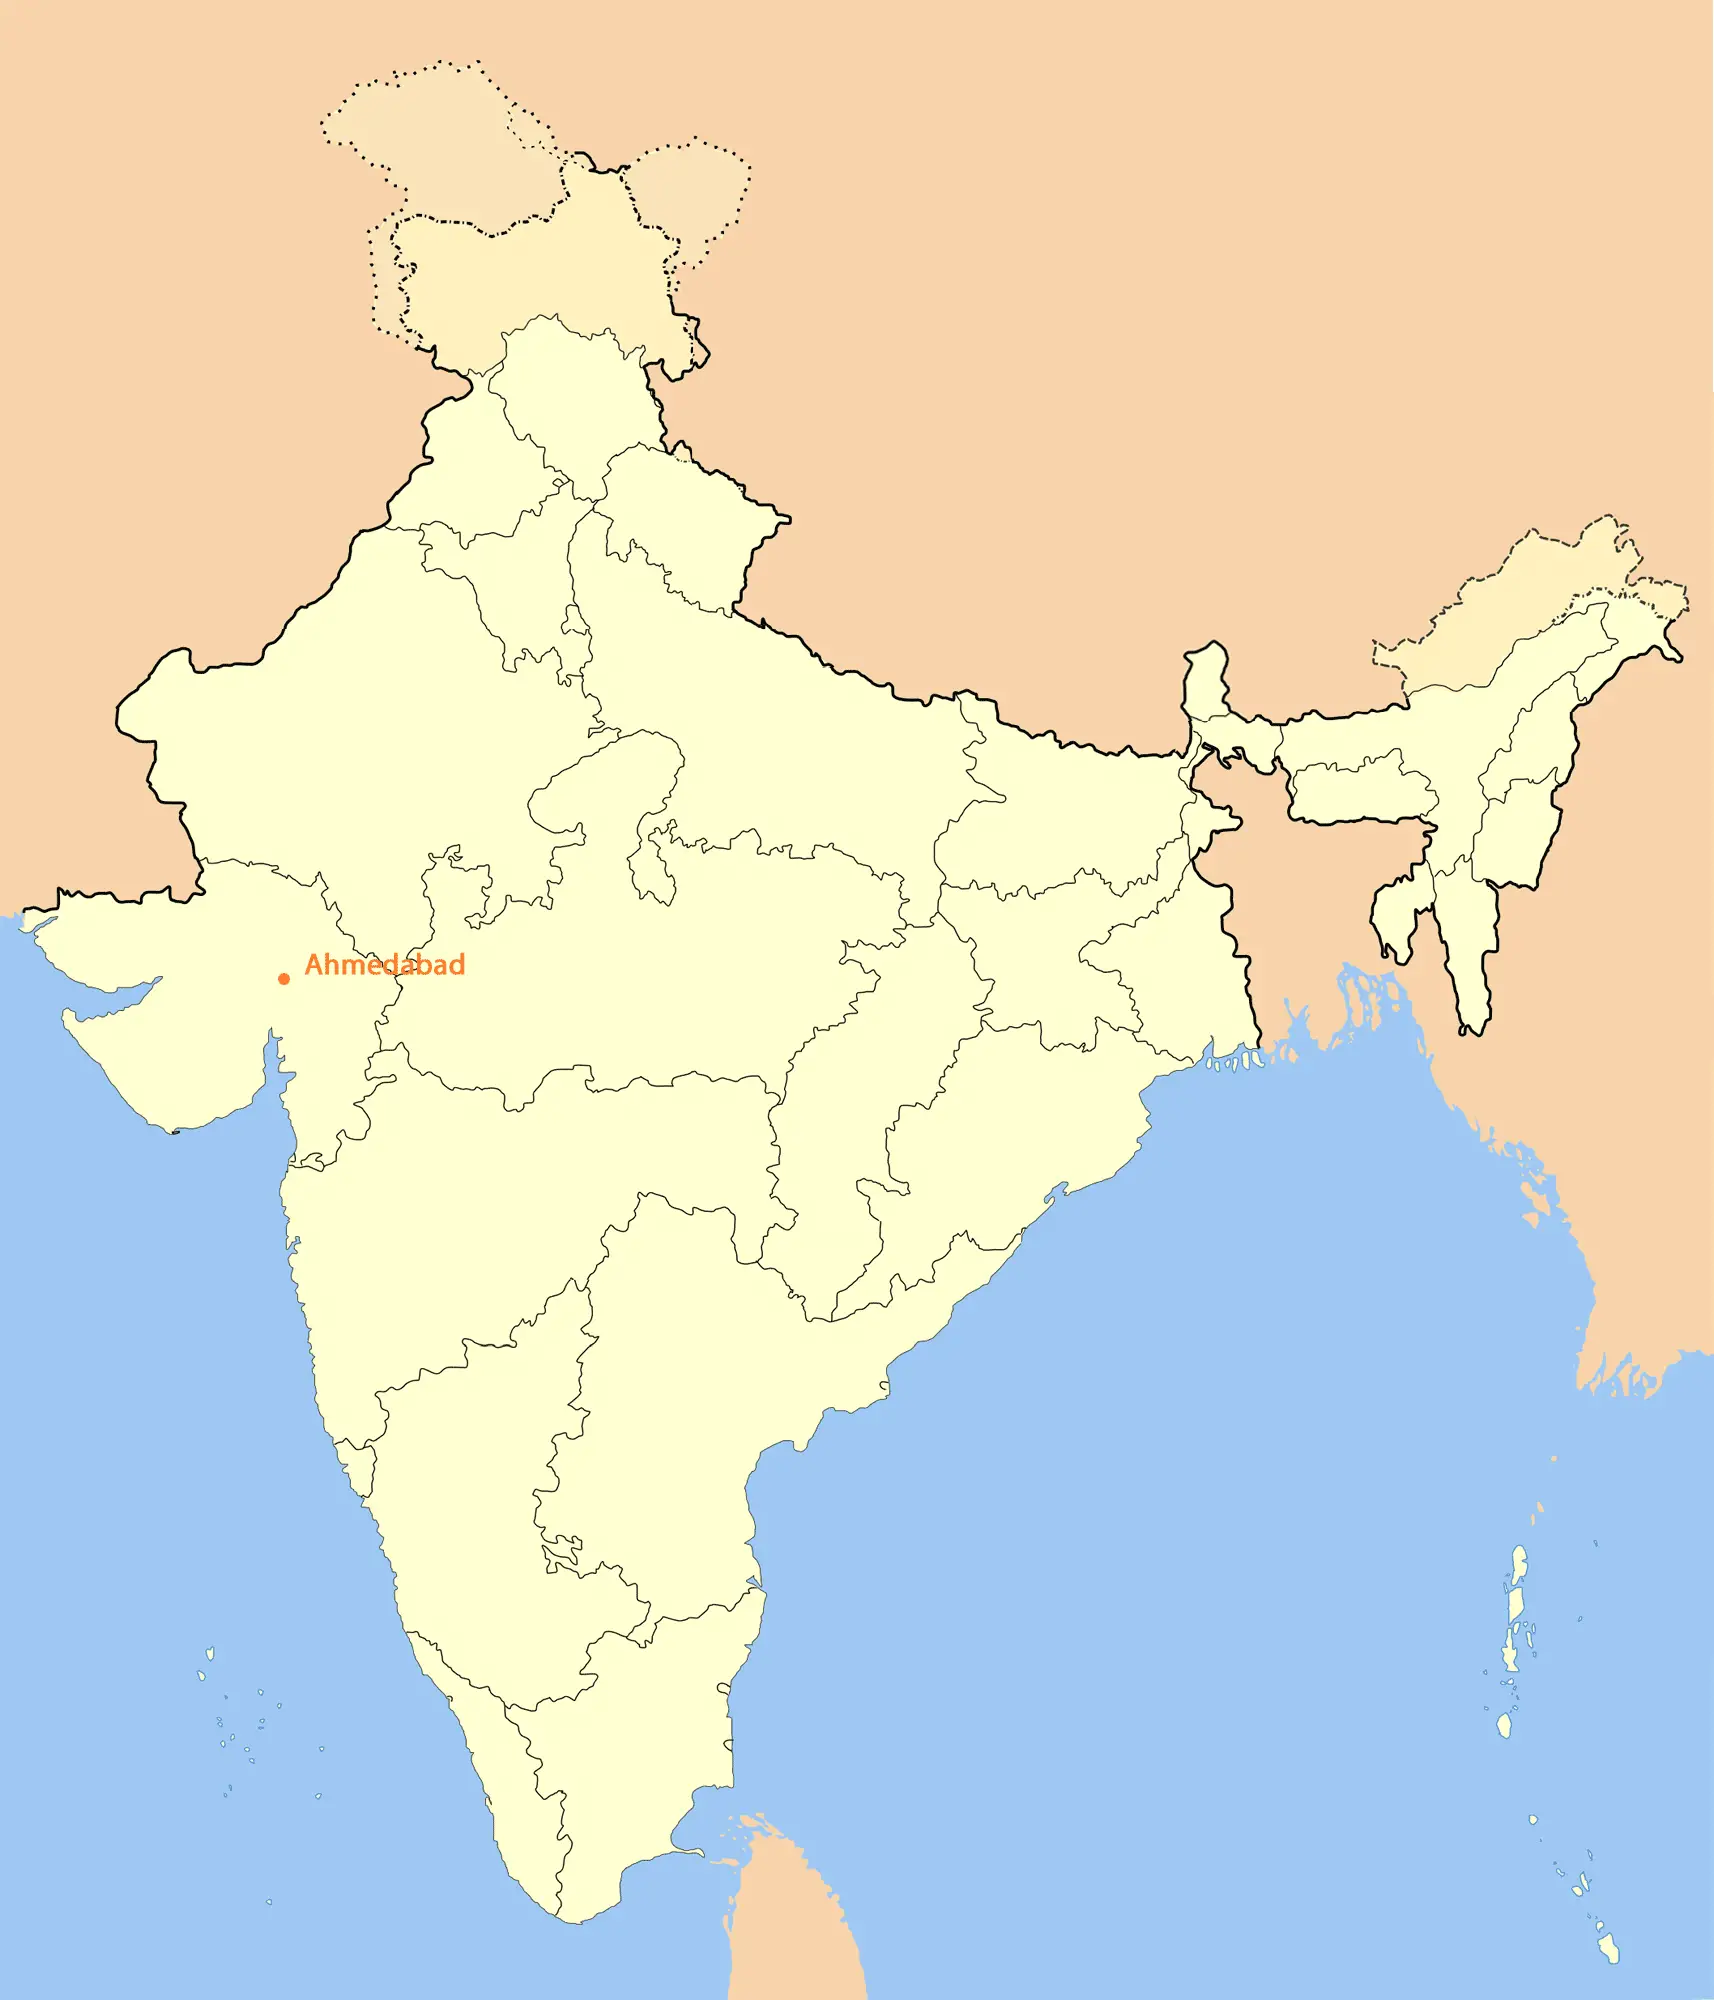 Location Map of Ahmedabad